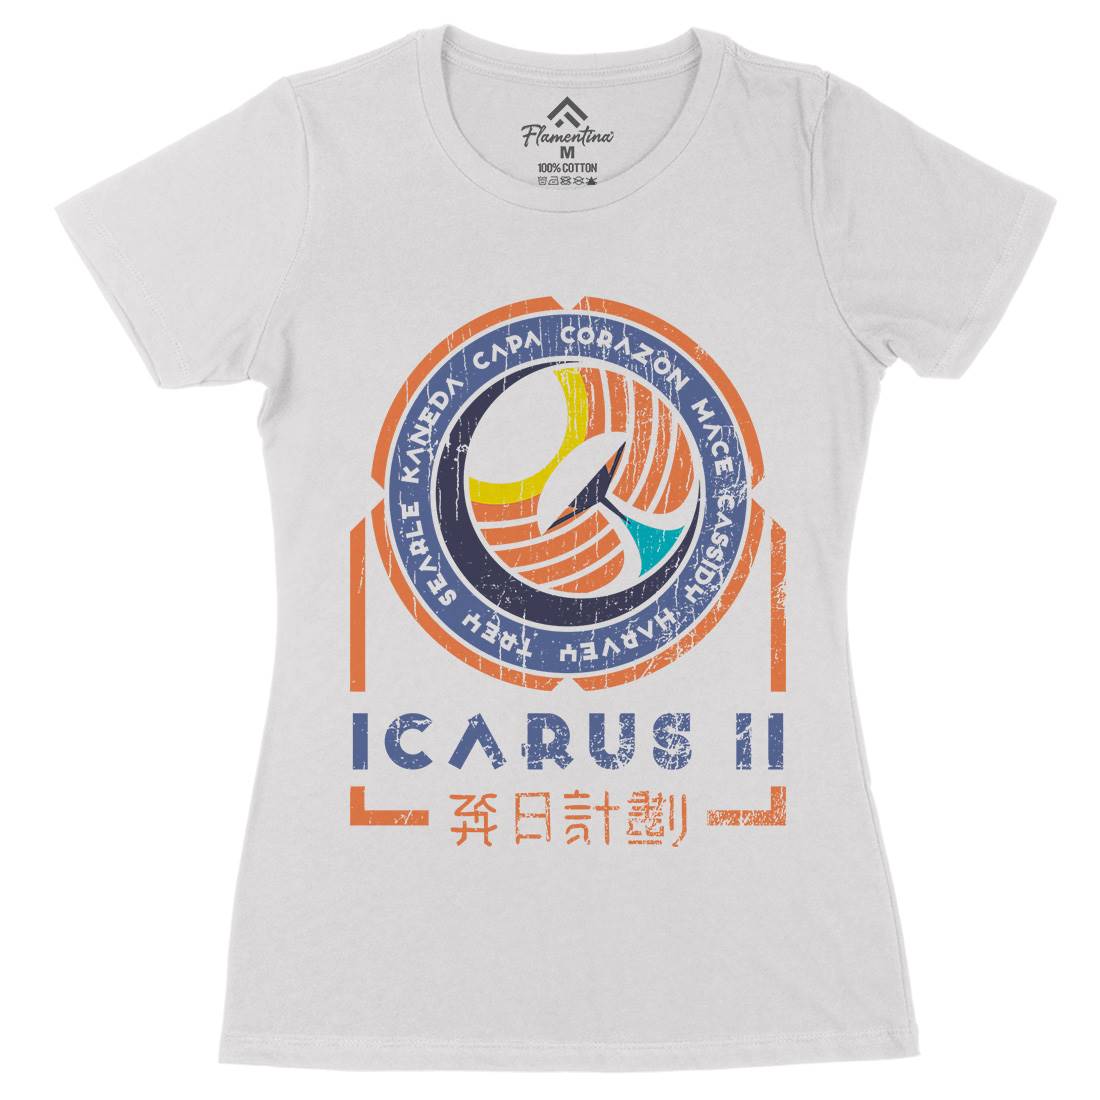 Icarus Ii Womens Organic Crew Neck T-Shirt Space D233